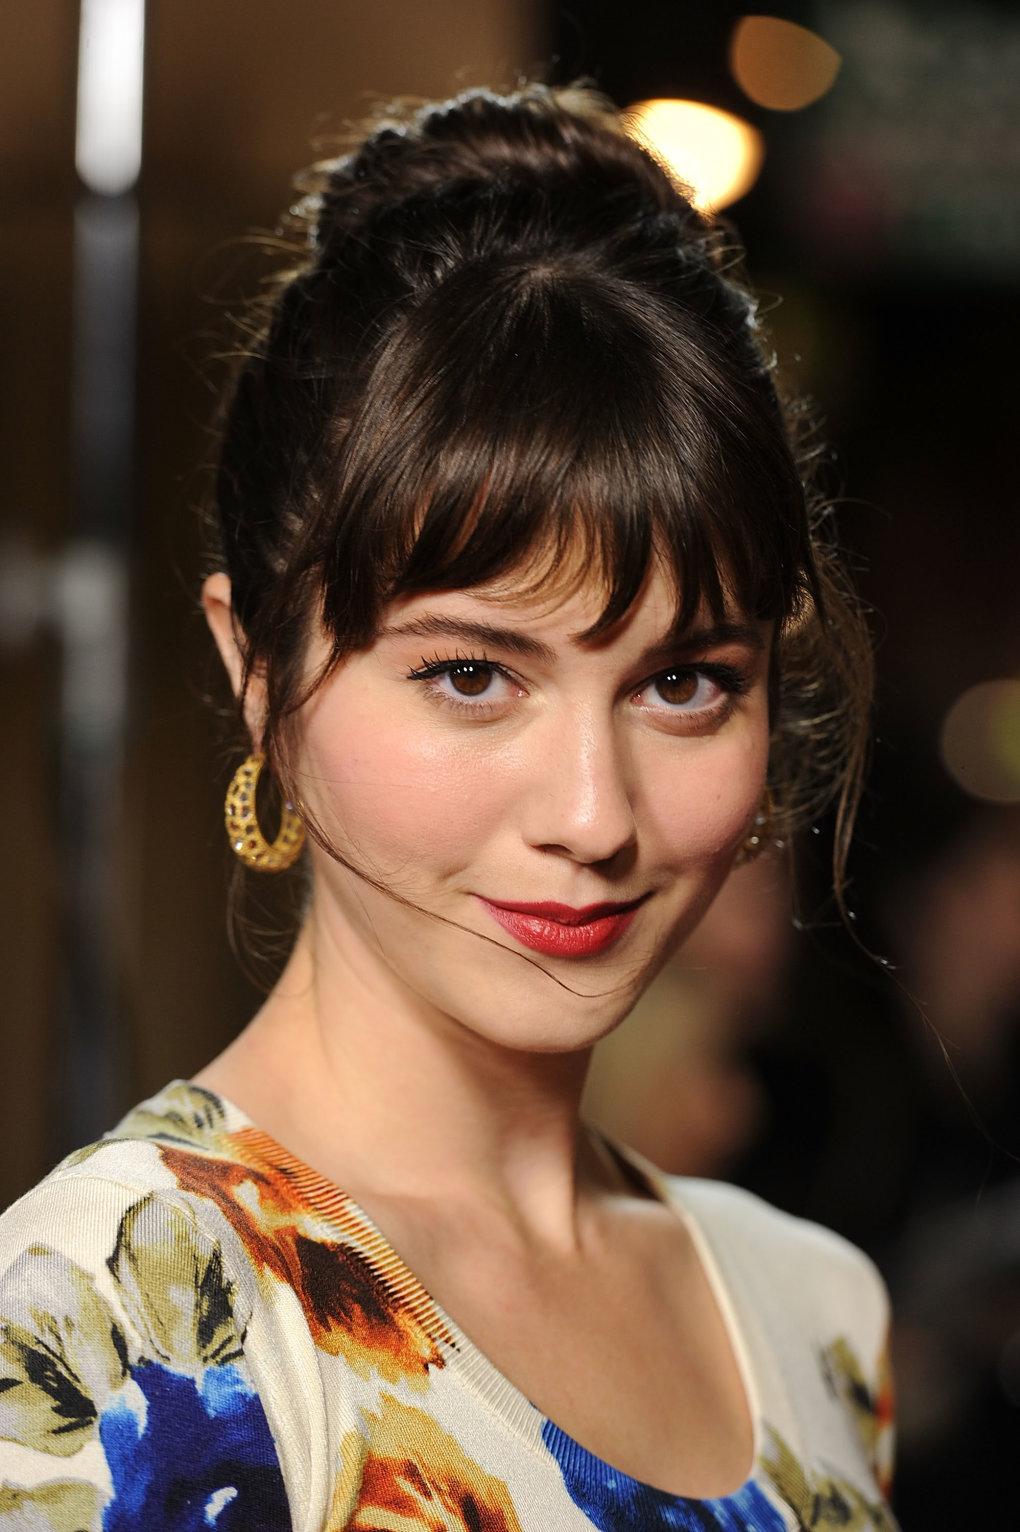 75+ Hottest Mary Elizabeth Winstead Pictures That Are Heaven On Earth | Best Of Comic Books